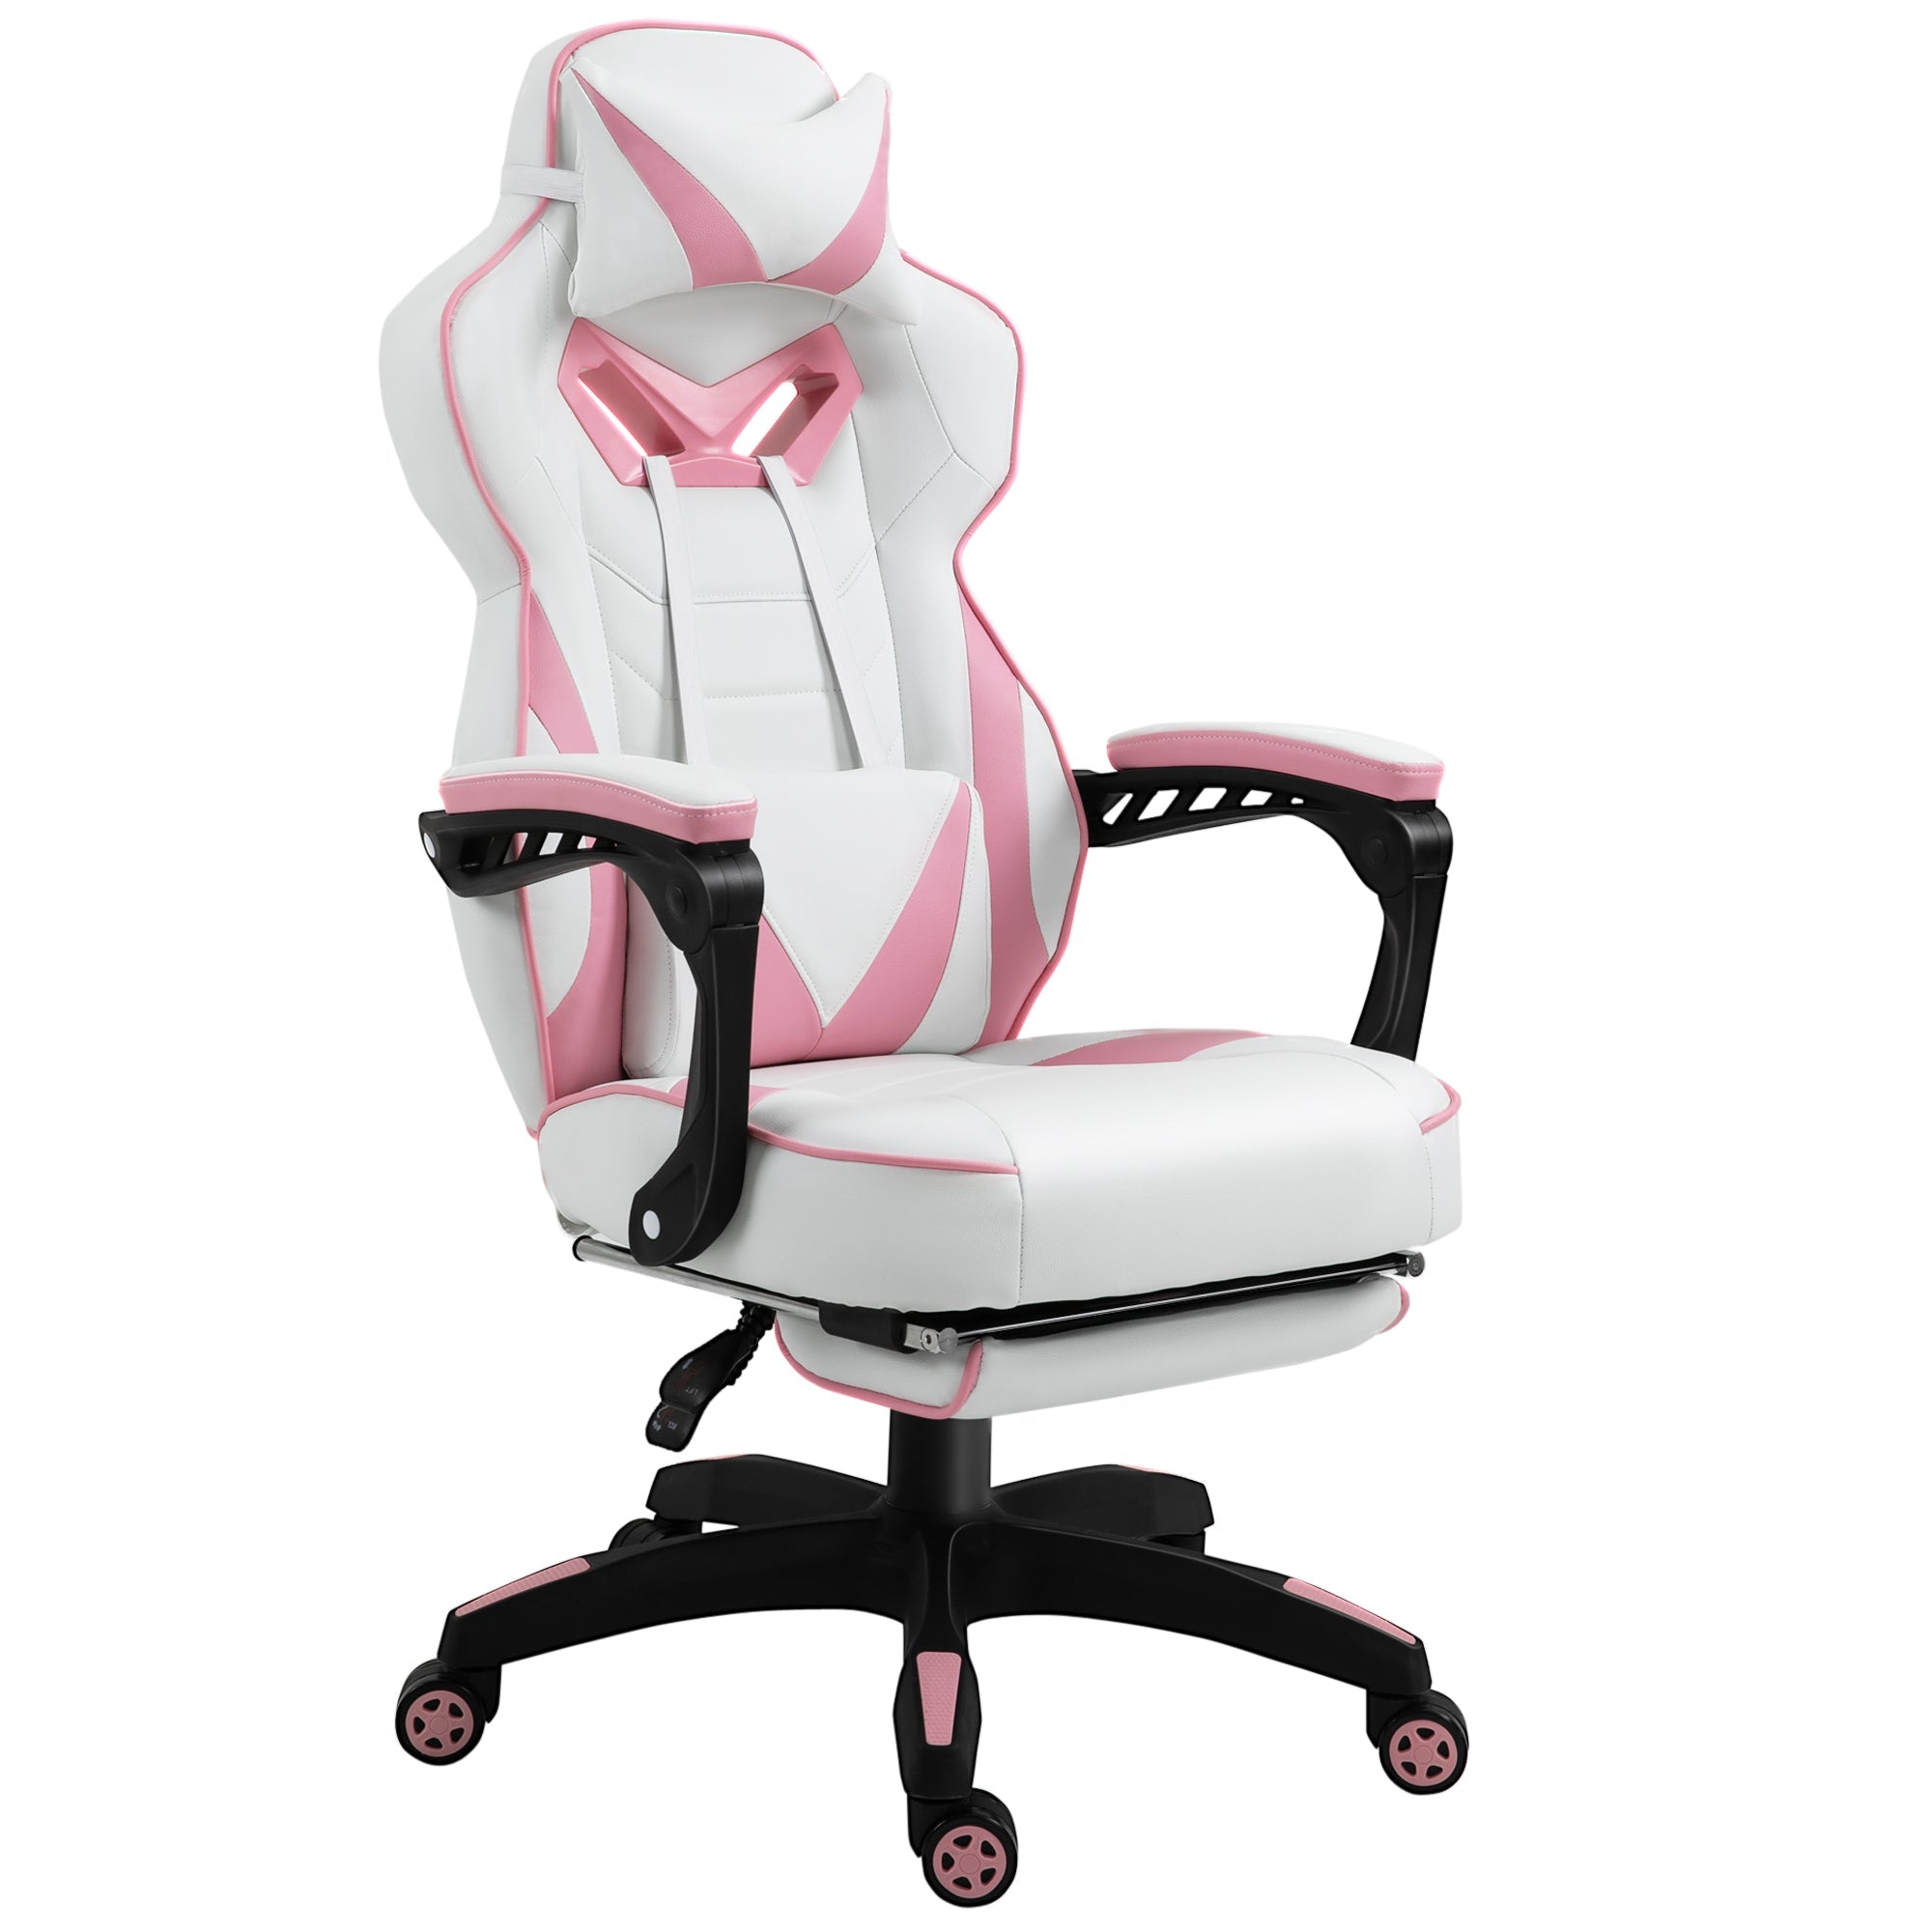 Ergonomic Racing Gaming Chair Office Desk Chair Adjustable Height Recliner with Wheels, Headrest, Lumbar Support, Retractable Footrest, Pink-0